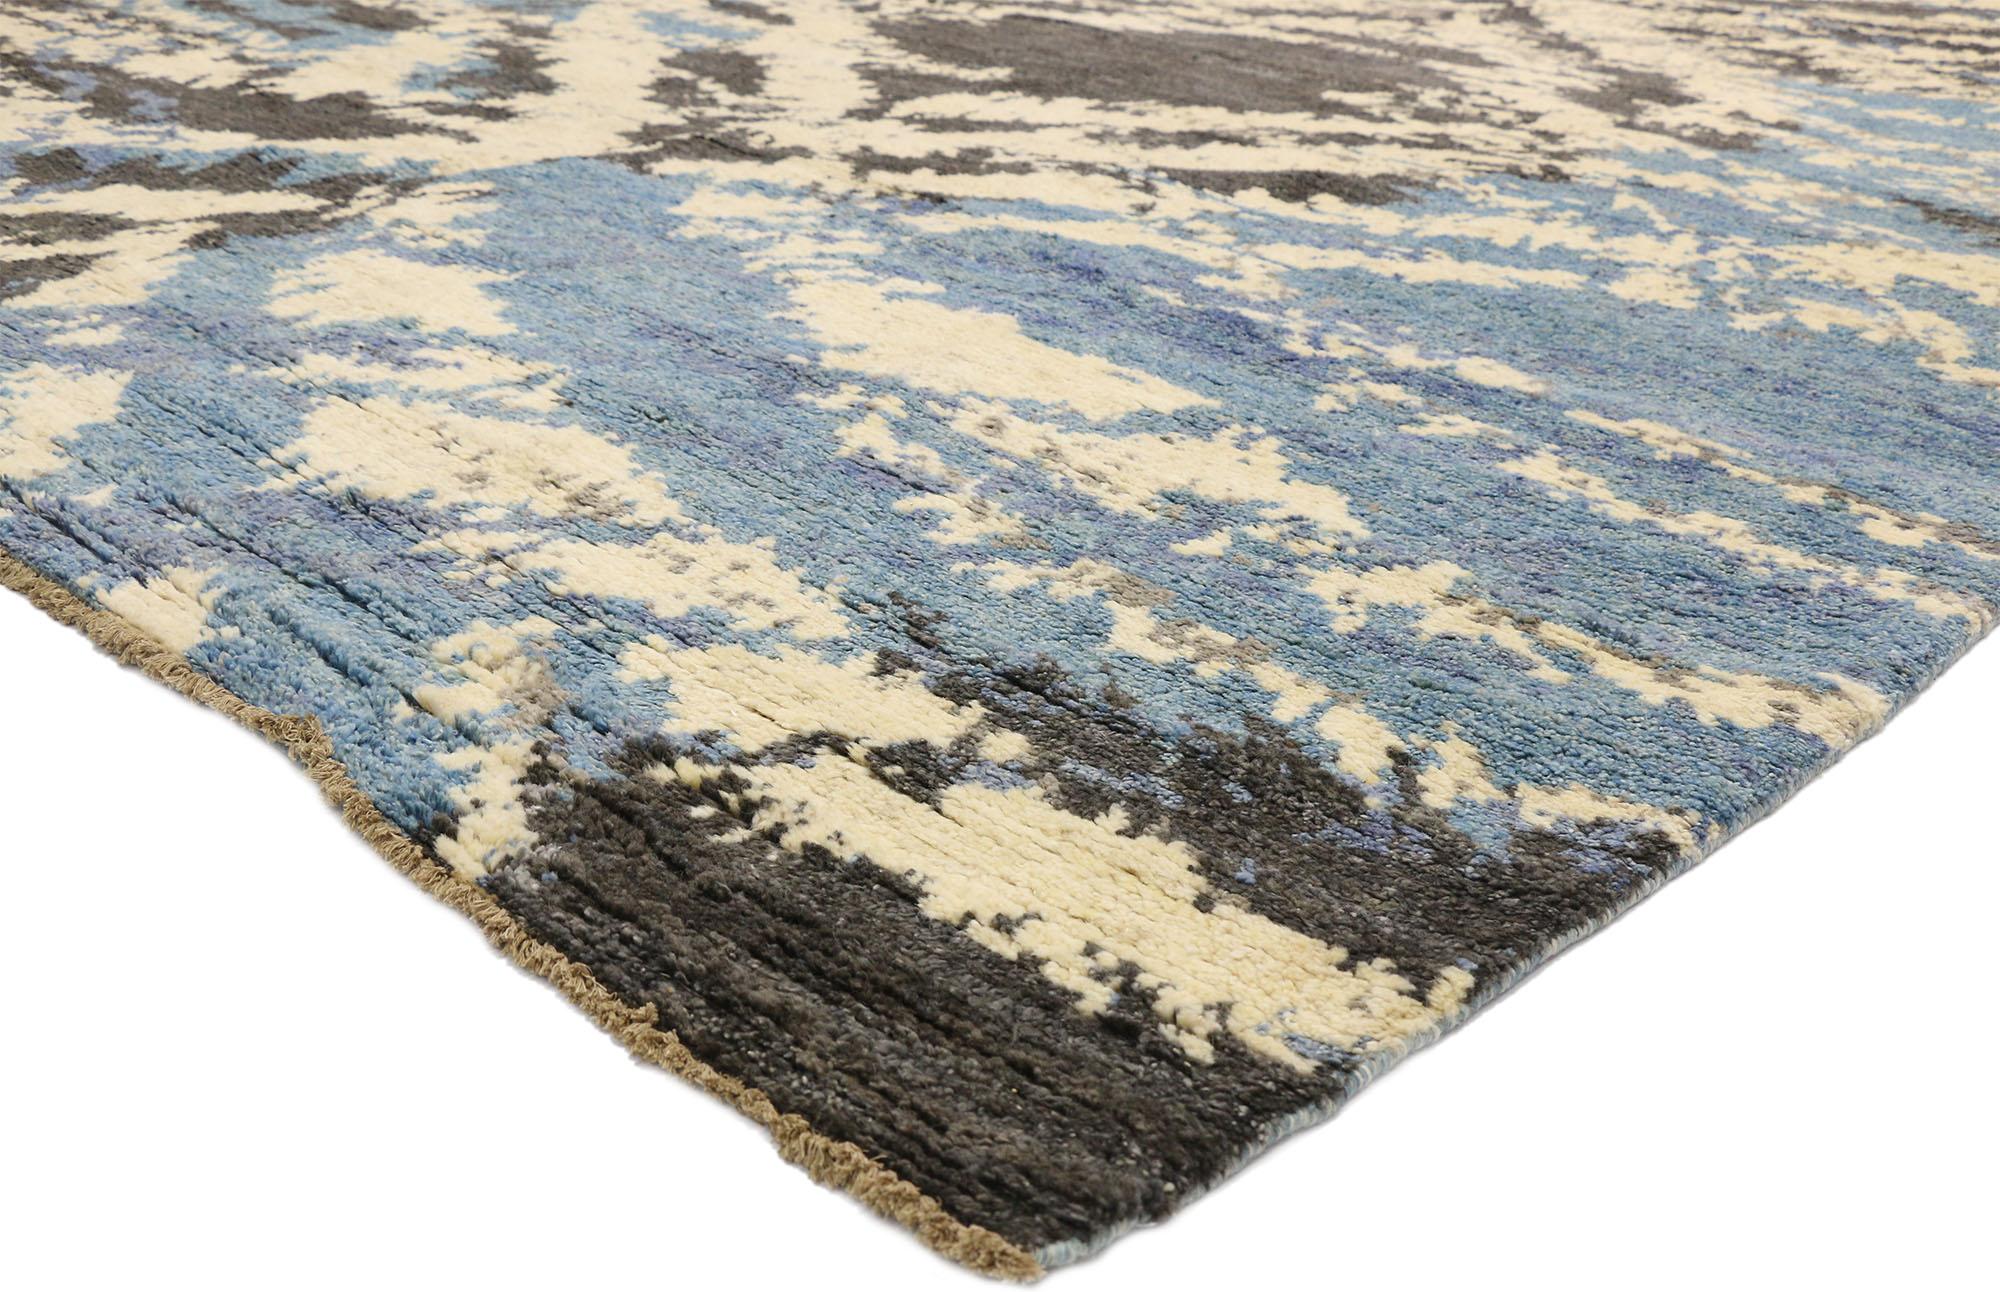 80479 New Abstract Moroccan Rug, 10'04 x 13'05.
Emanating abstract expressionism with incredible detail and texture, this hand knotted Moroccan area rug is a captivating vision of woven beauty. The expressionist design and esoteric colorway woven